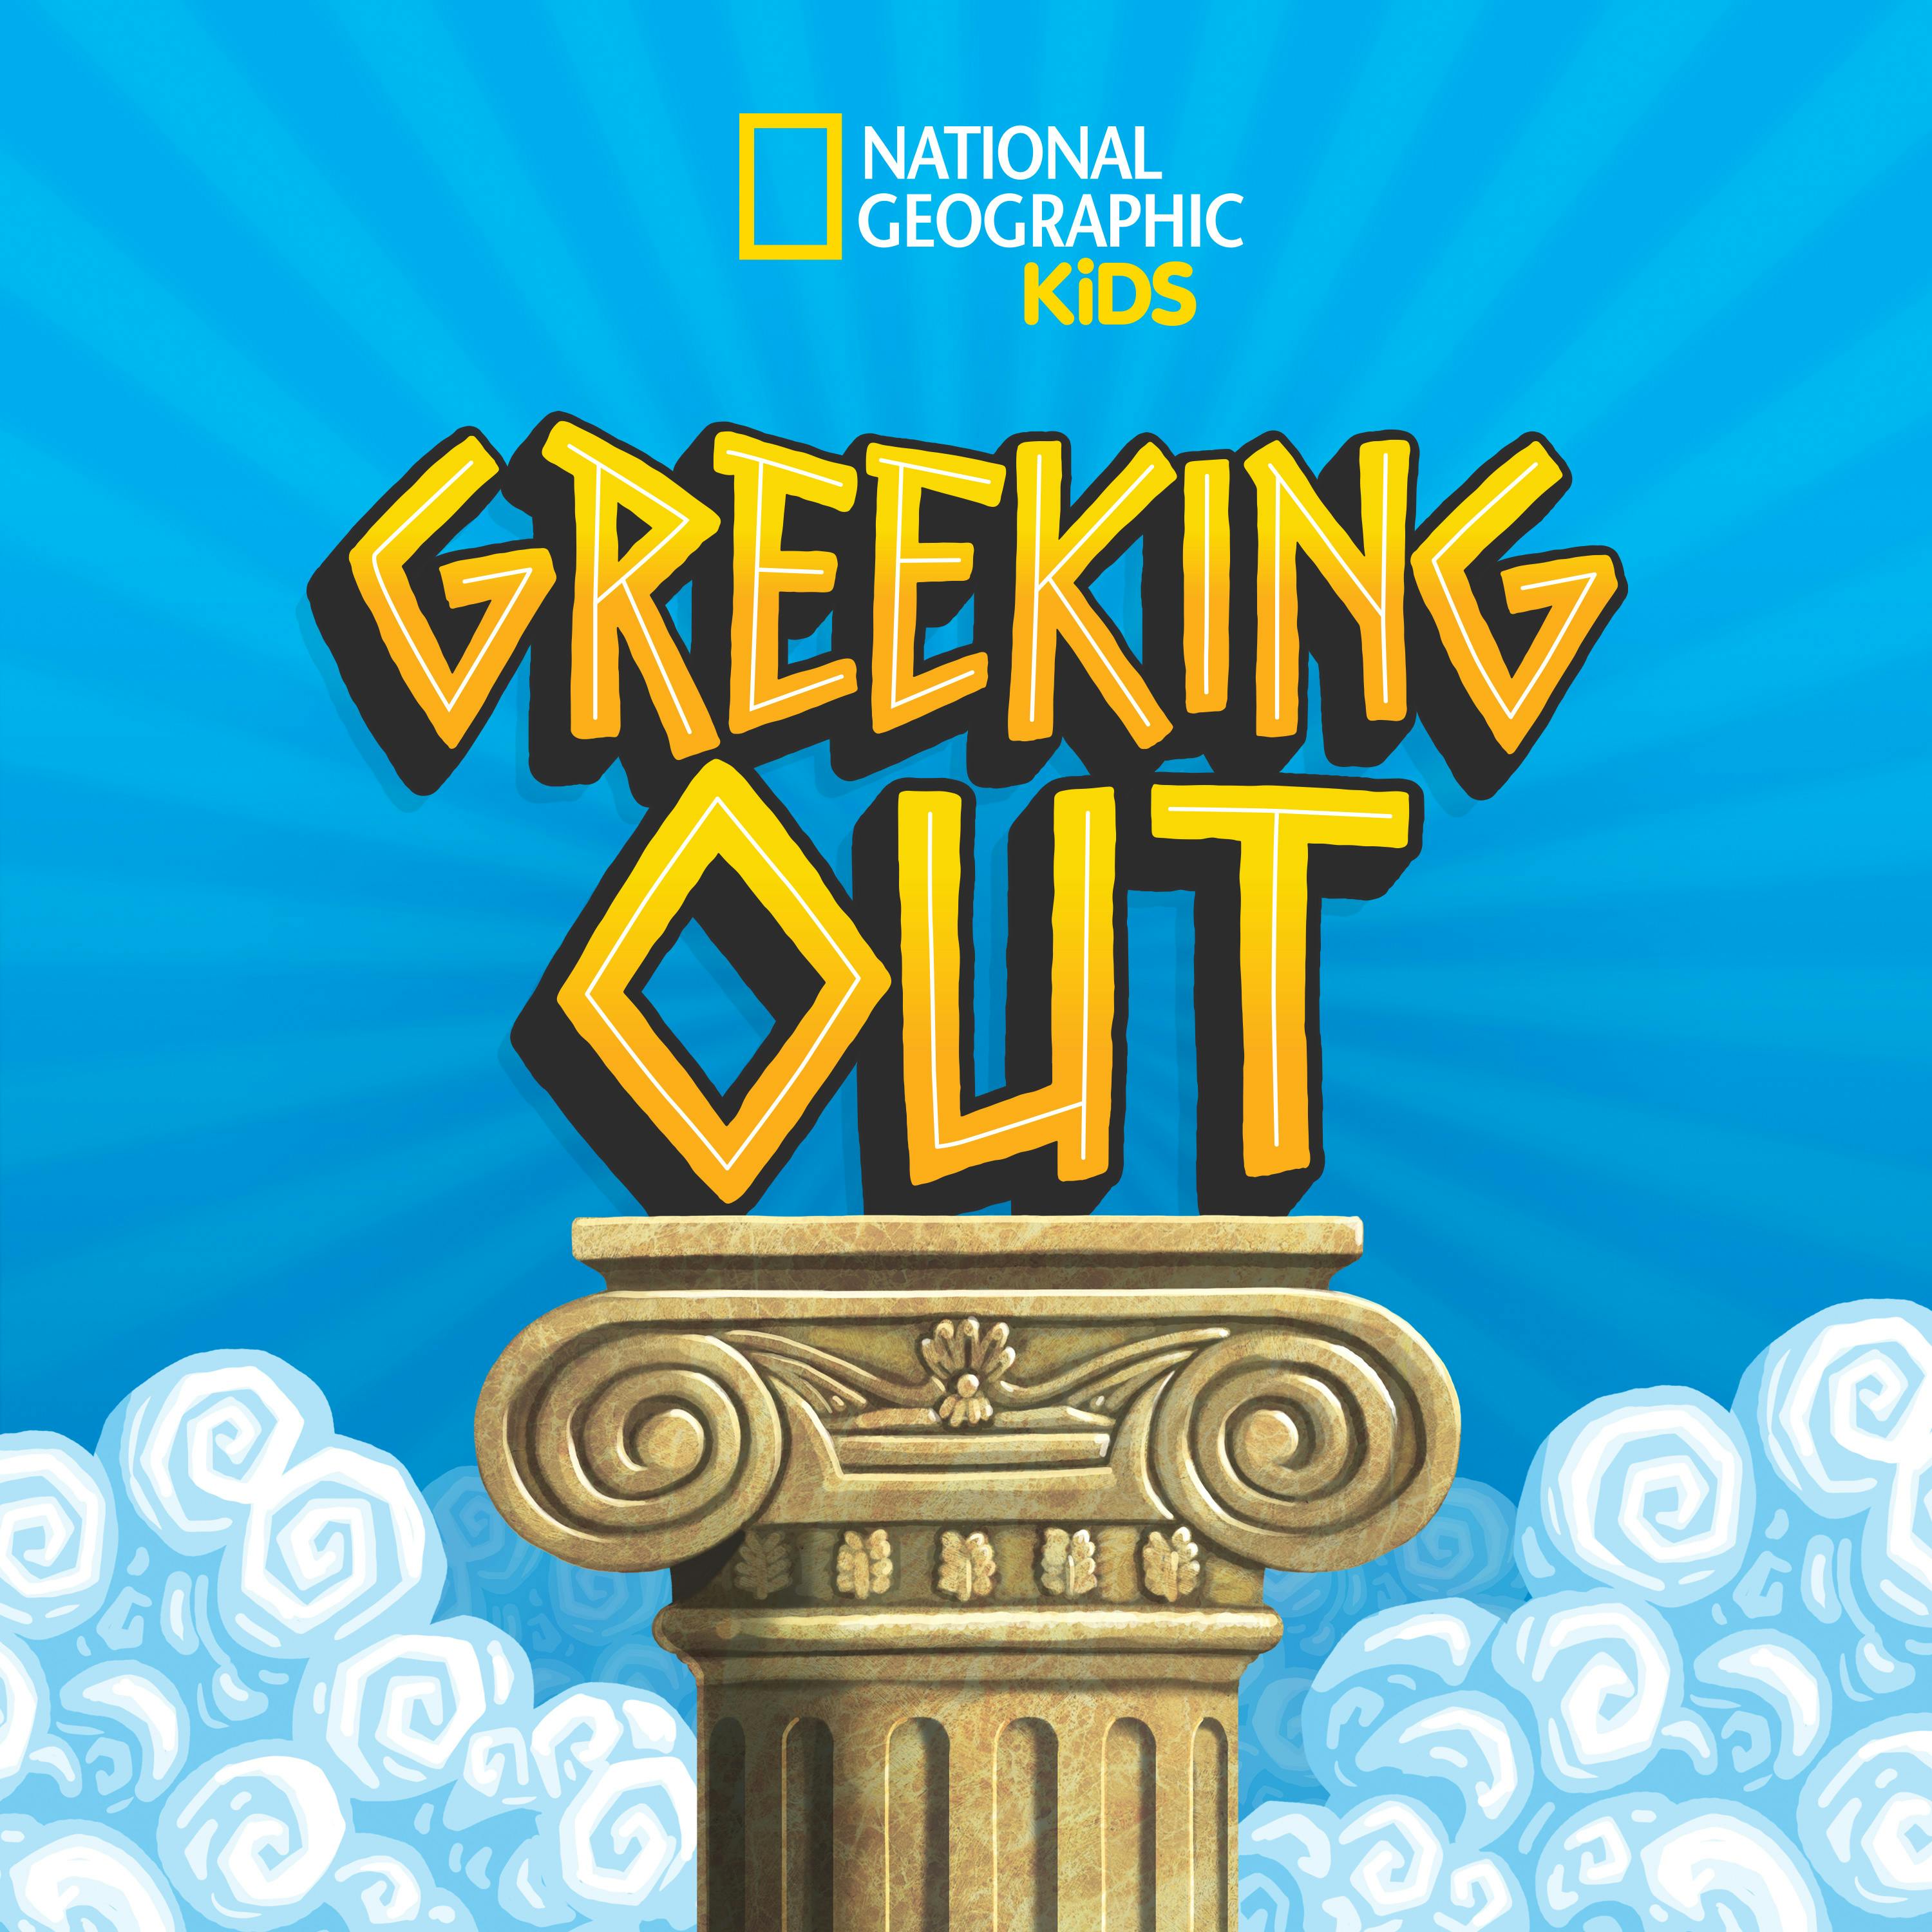 Greeking Out from National Geographic Kids podcast show image